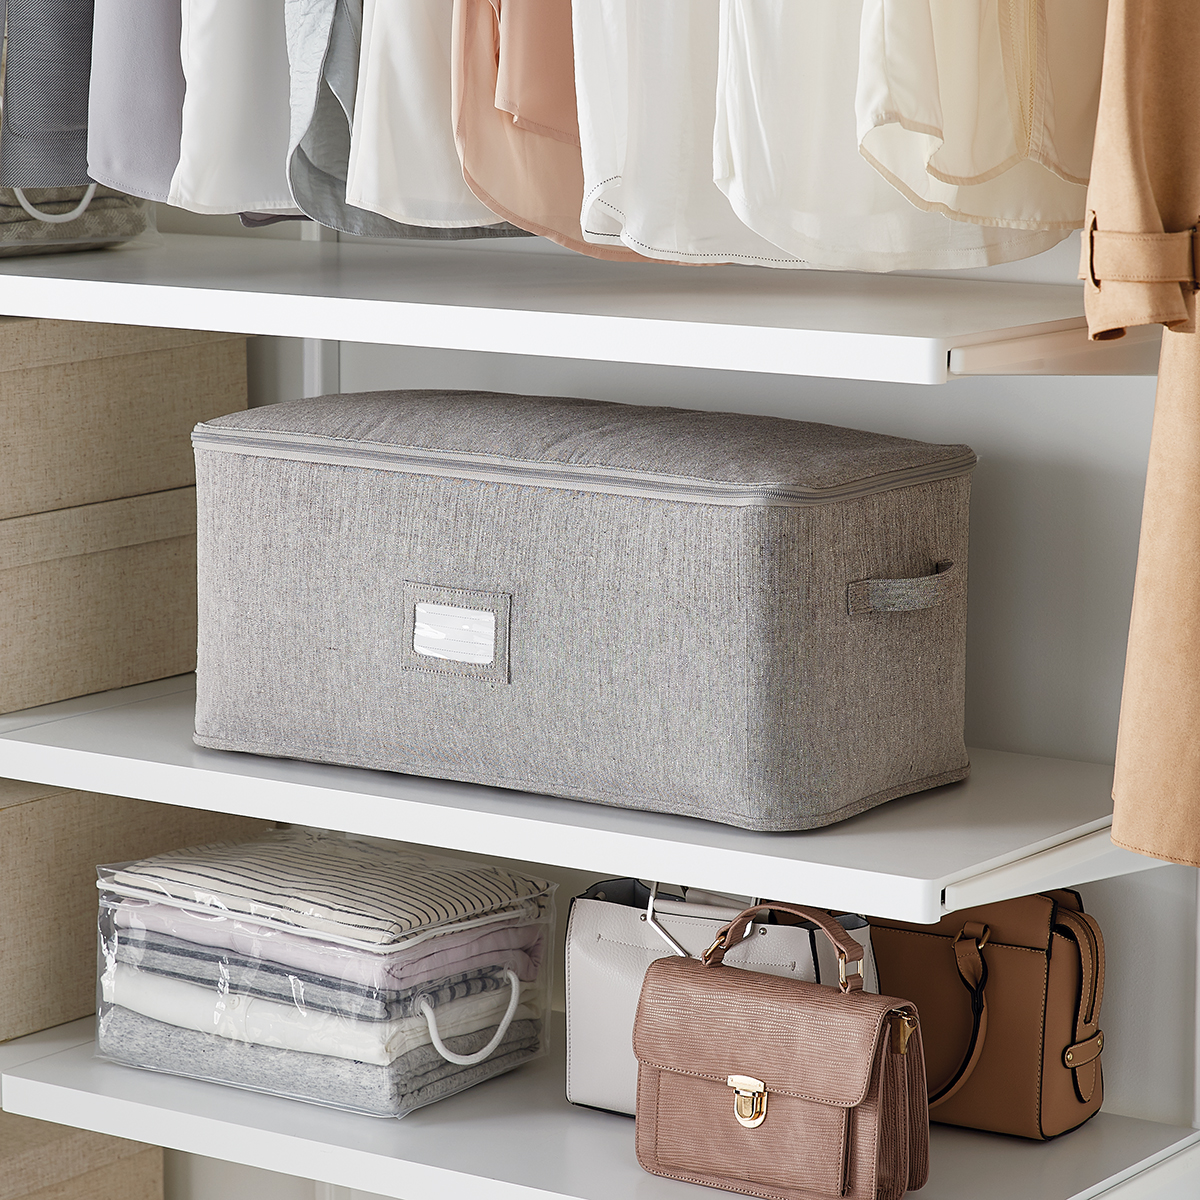 https://www.containerstore.com/catalogimages/462919/10079384-medium-storage-bag-grey-PV.jpeg